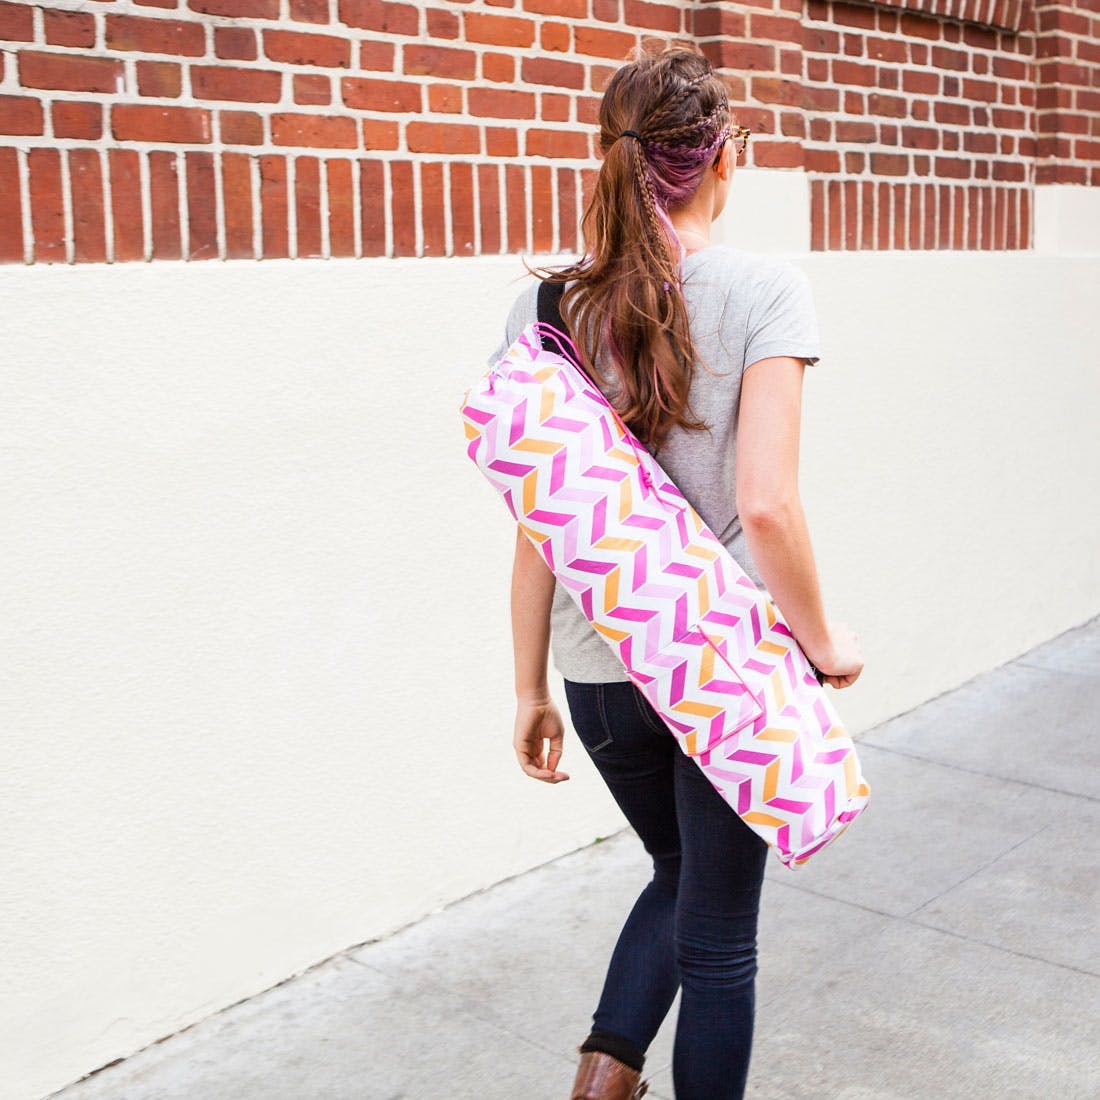 How to Make Your Own Colorful Custom Yoga Bag - Brit + Co